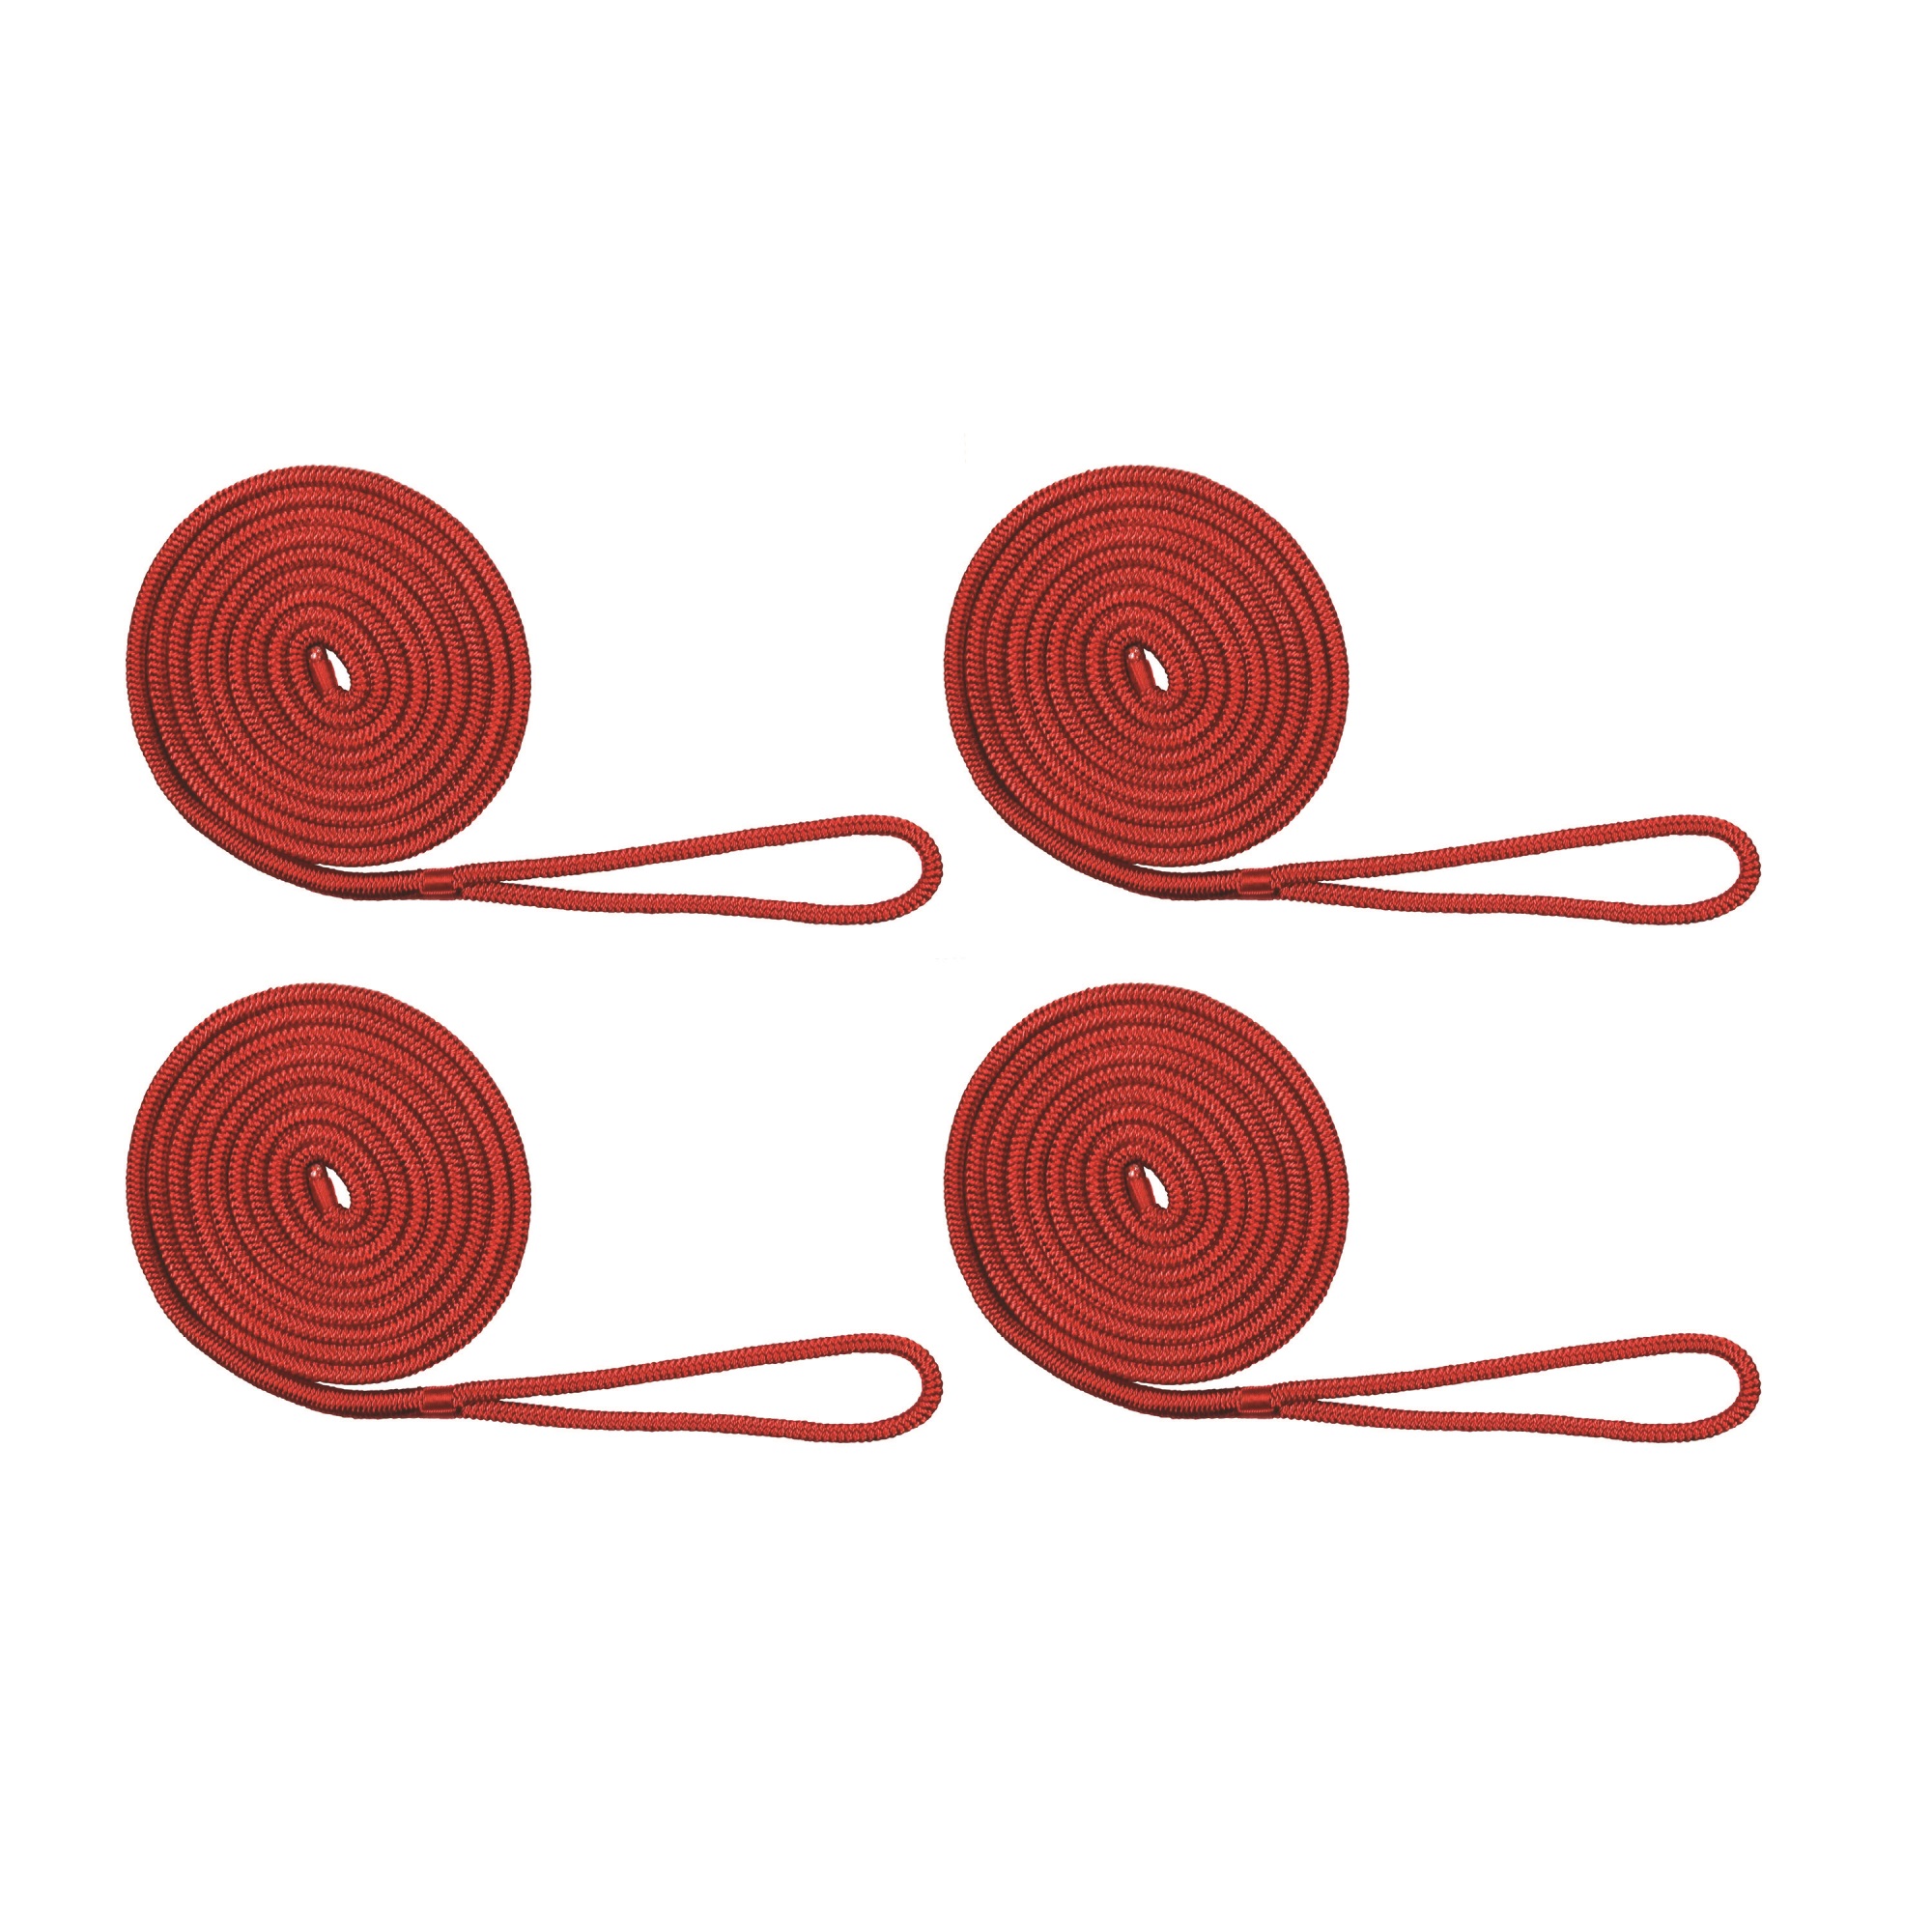 Extreme Max 3006.3008 BoatTector Double Braid Nylon Dock Line Value 4-Pack - 3/8" x 15', Red